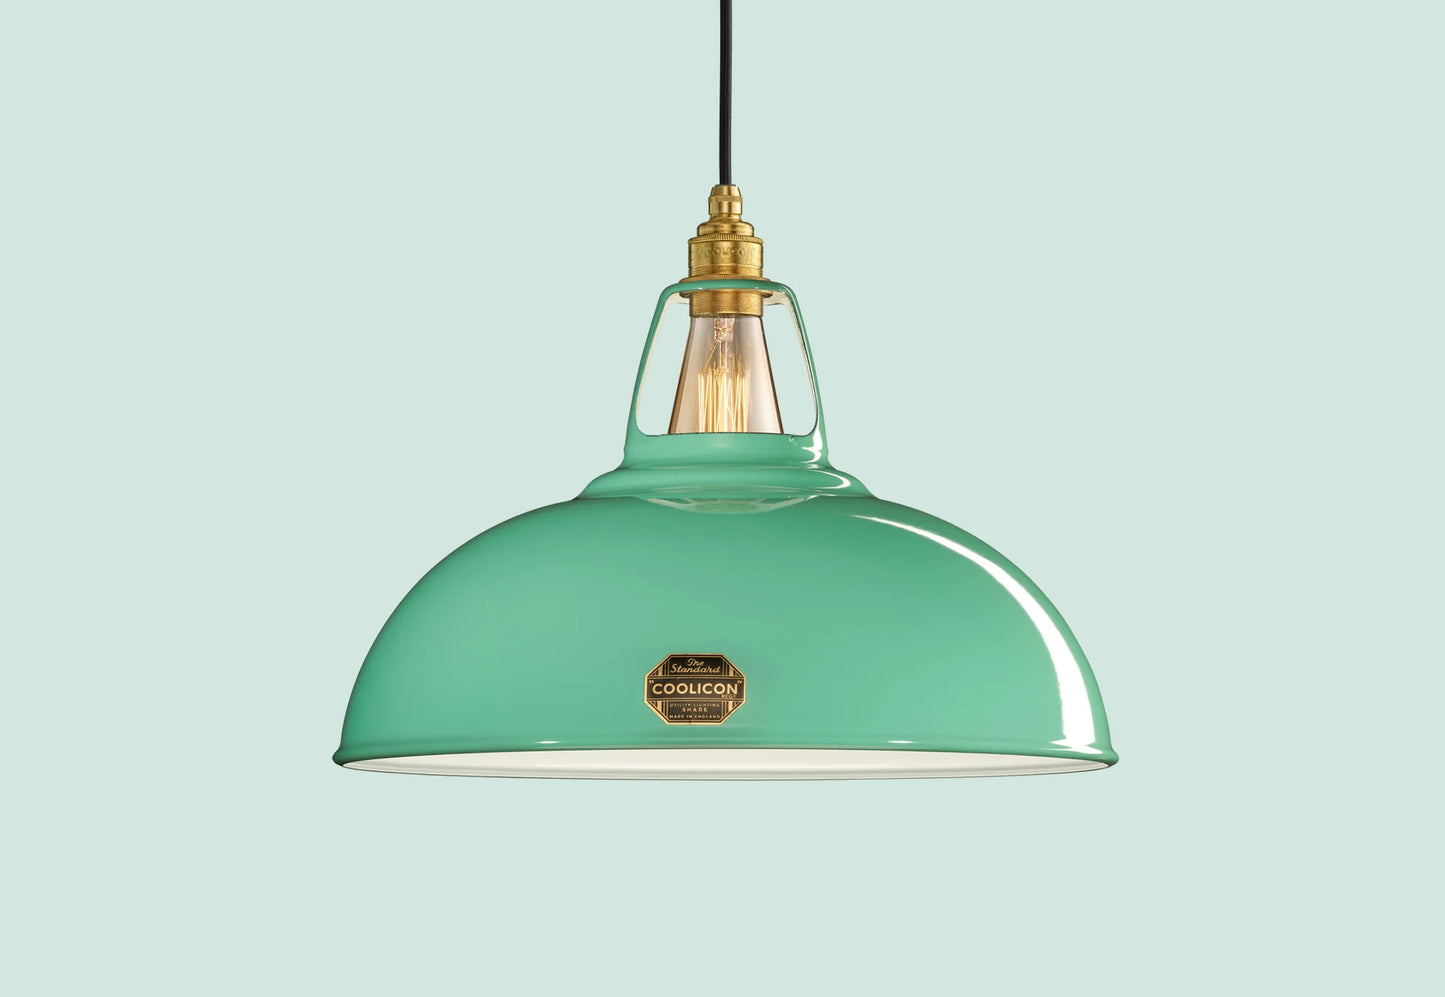 Large Fresh Teal Coolicon lampshade with a Brass pendant set over a light teal background